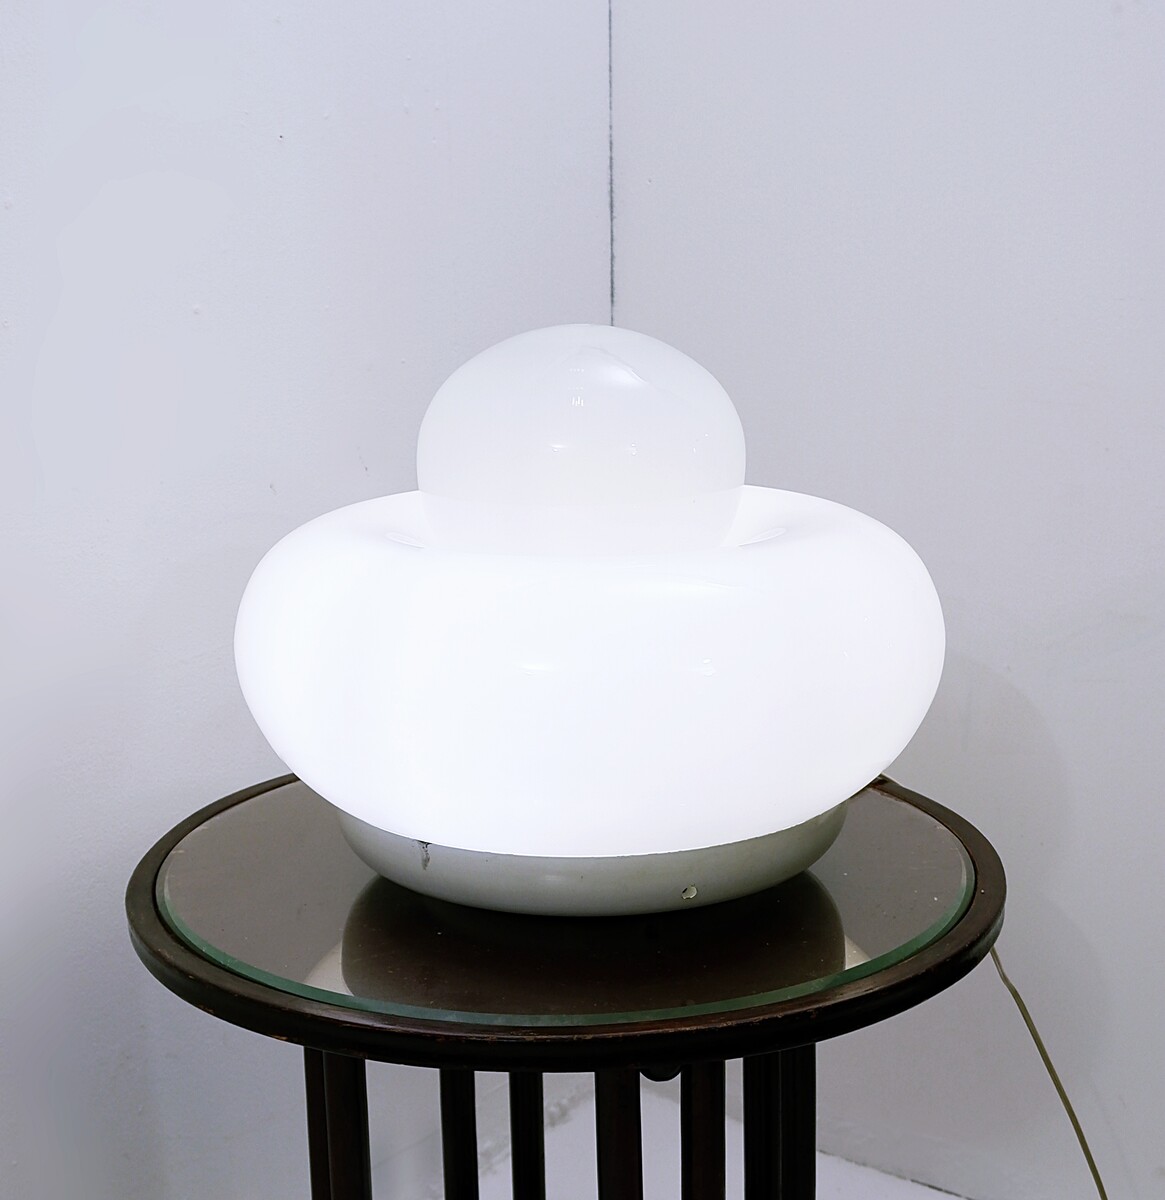 Electra glass table lamp by Giuliana Gramigna for Artemide, 1960s - Palainco